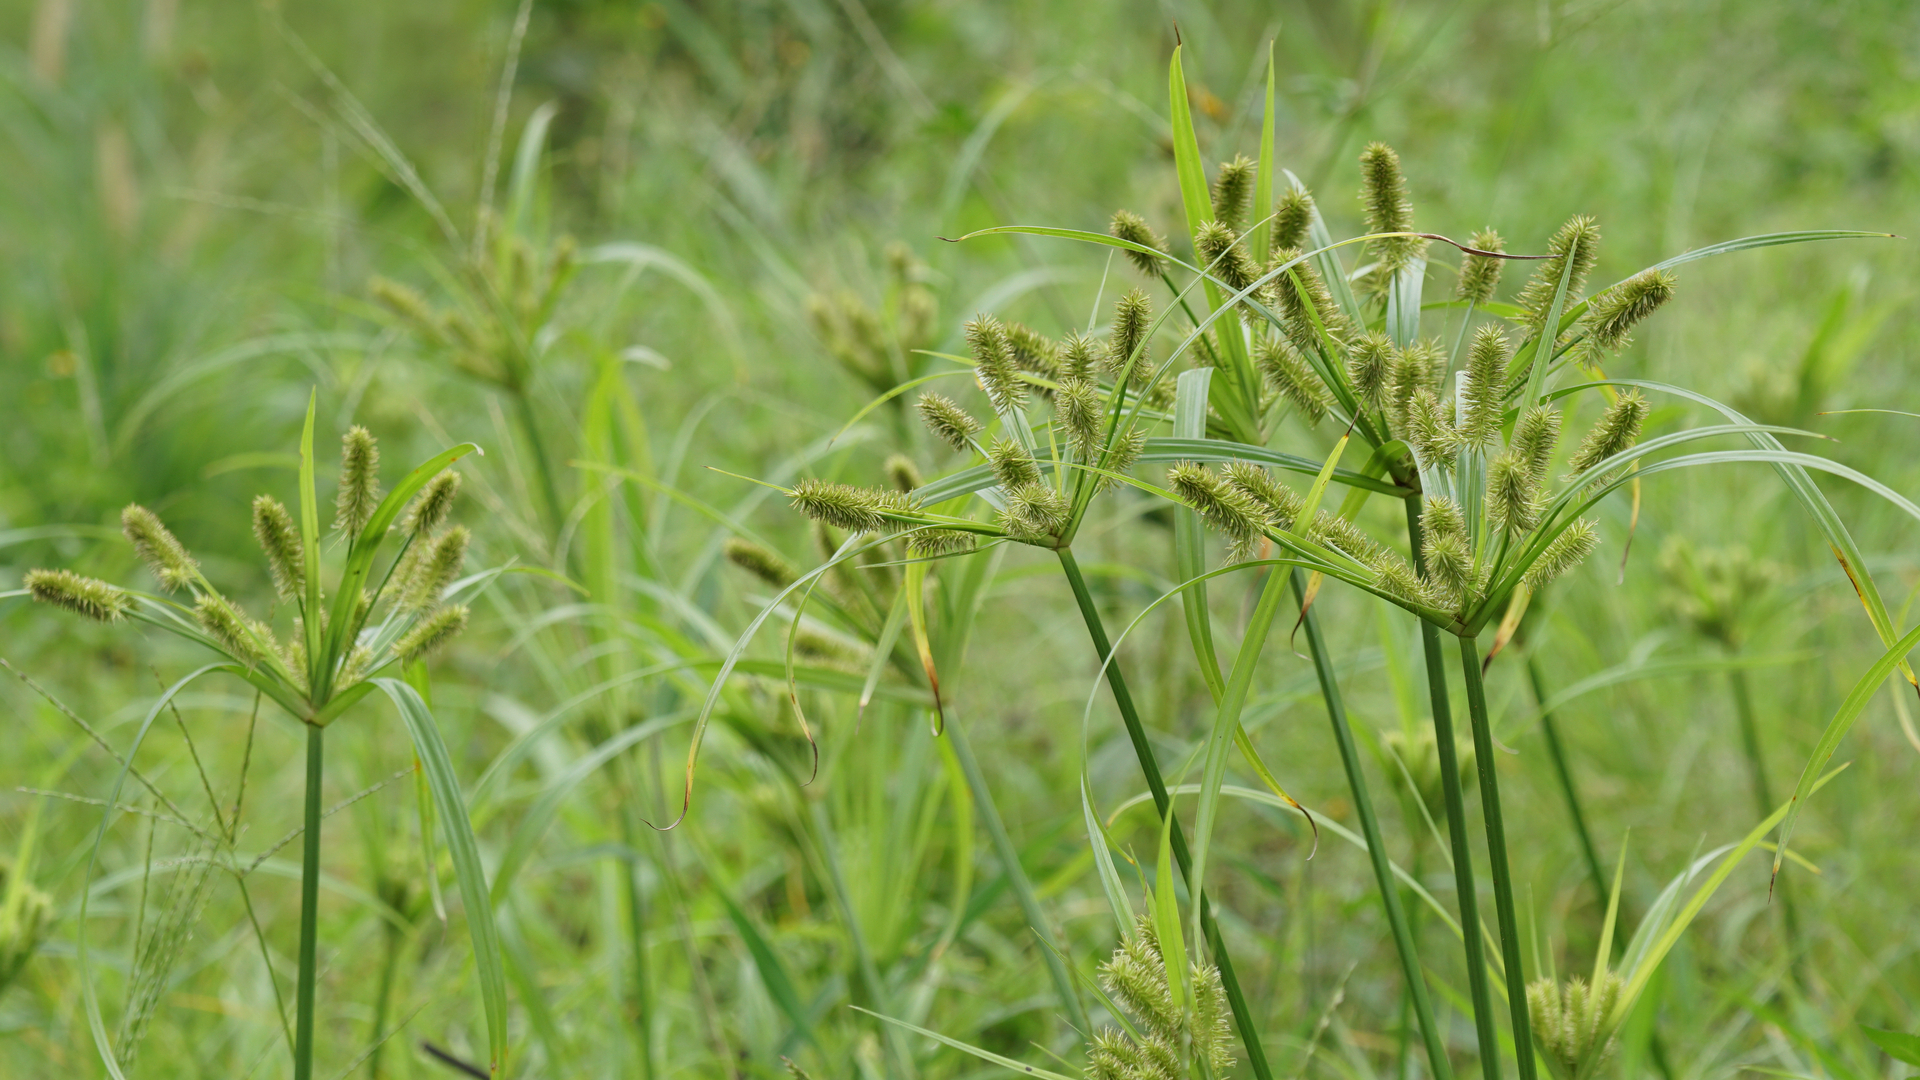 Is Your Lawn Infested With Yellow Nutsedge? Here’s What to Do!